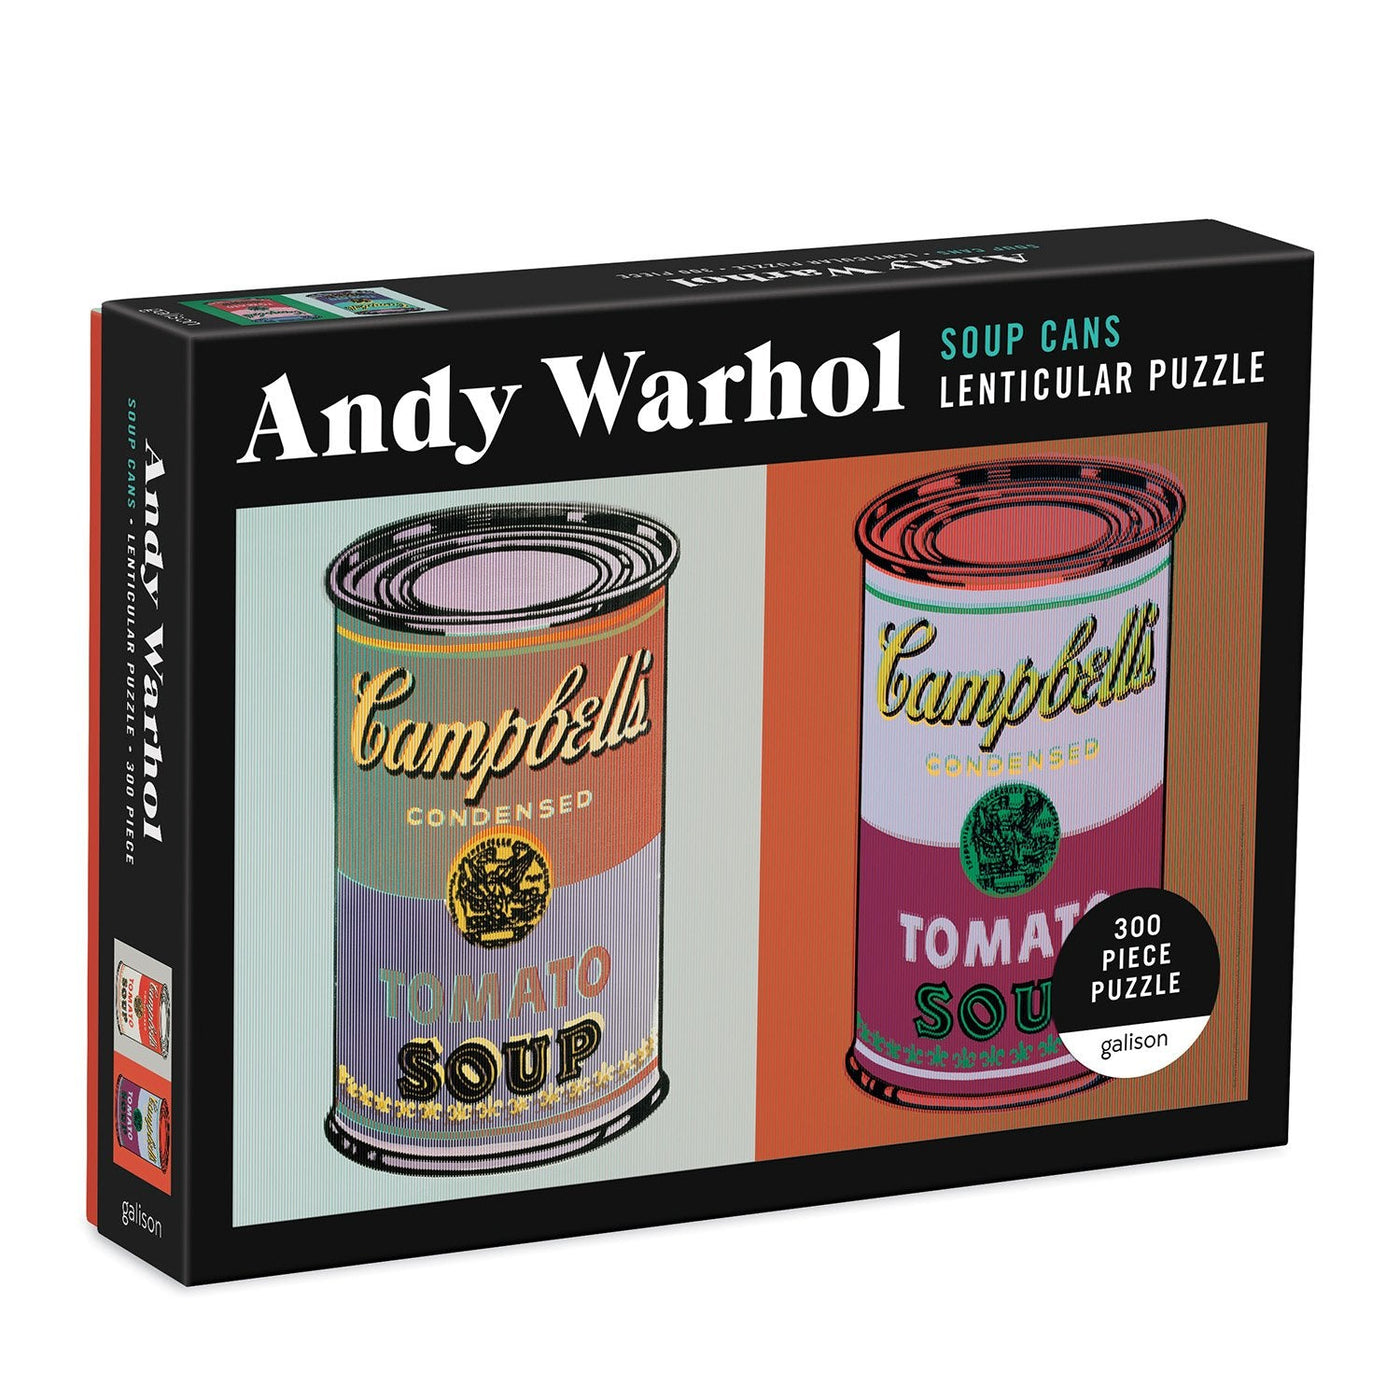 Andy Warhol Soup Cans | 300 Piece Jigsaw Puzzle